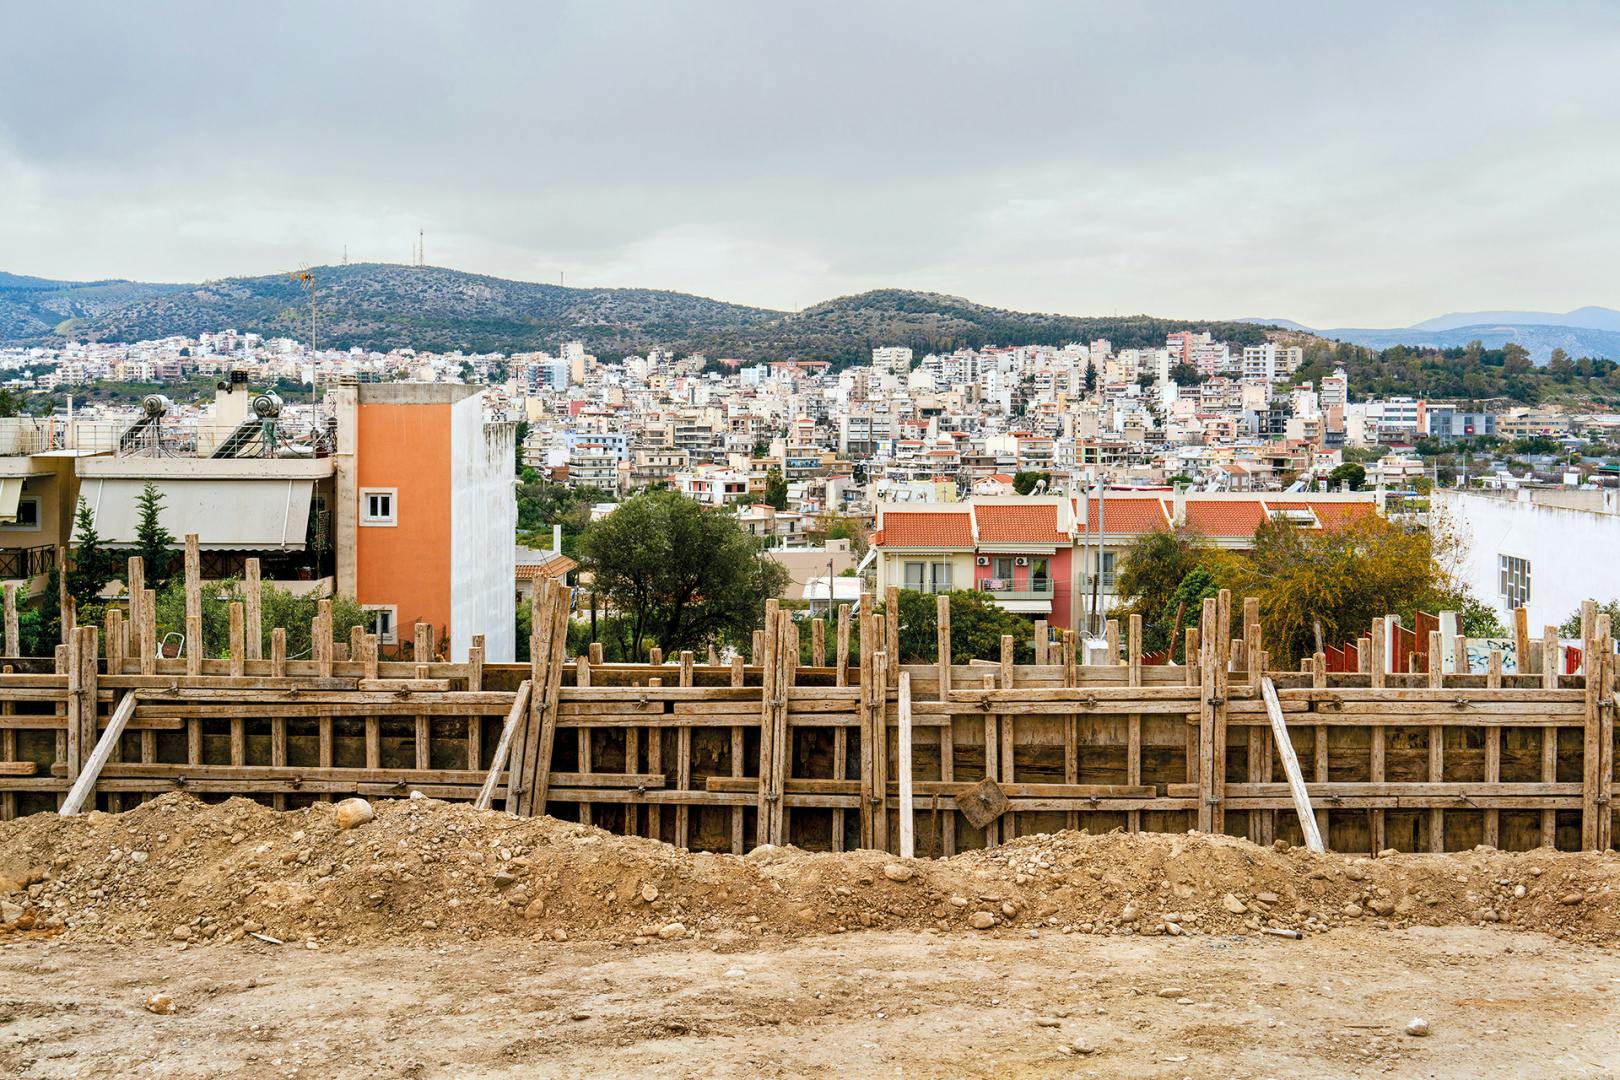 Image by Niko J. Kallianiotis showing a construction site overlooking Athens